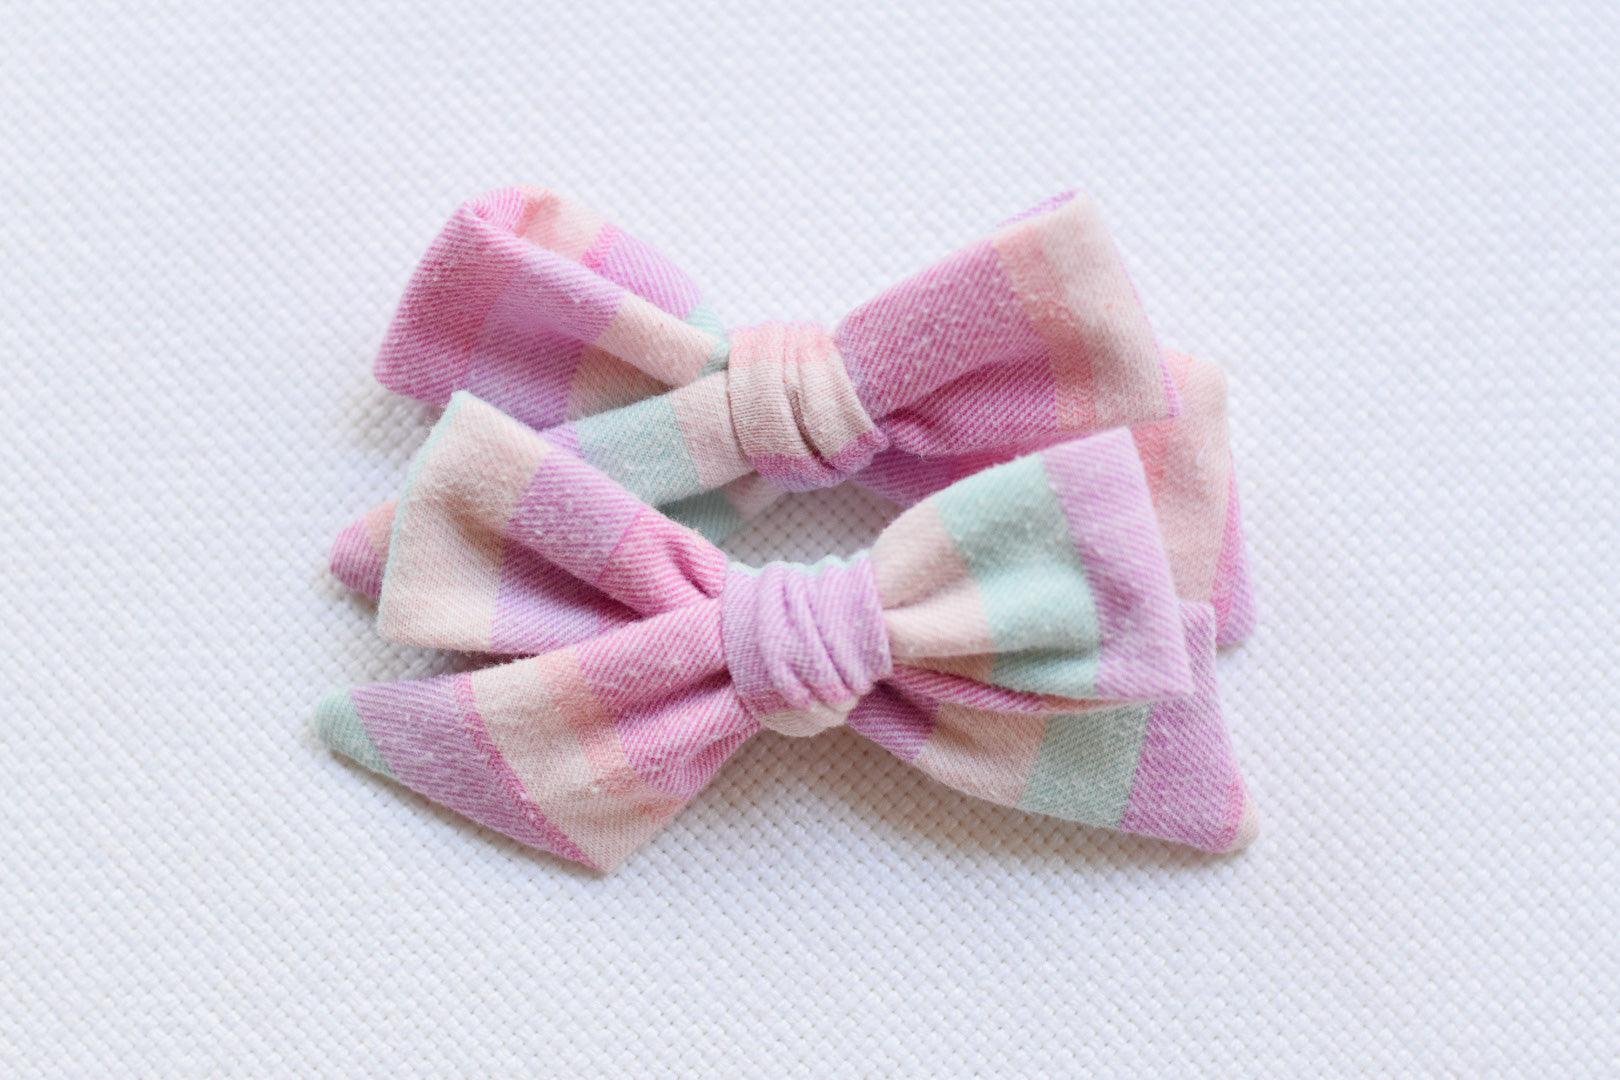 Sentimental Bow | Nashville Bow Co. - Classic Hair Bows, Bow Ties, Basket Bows, Pacifier Clips, Wreath Sashes, Swaddle Bows. Classic Southern Charm.